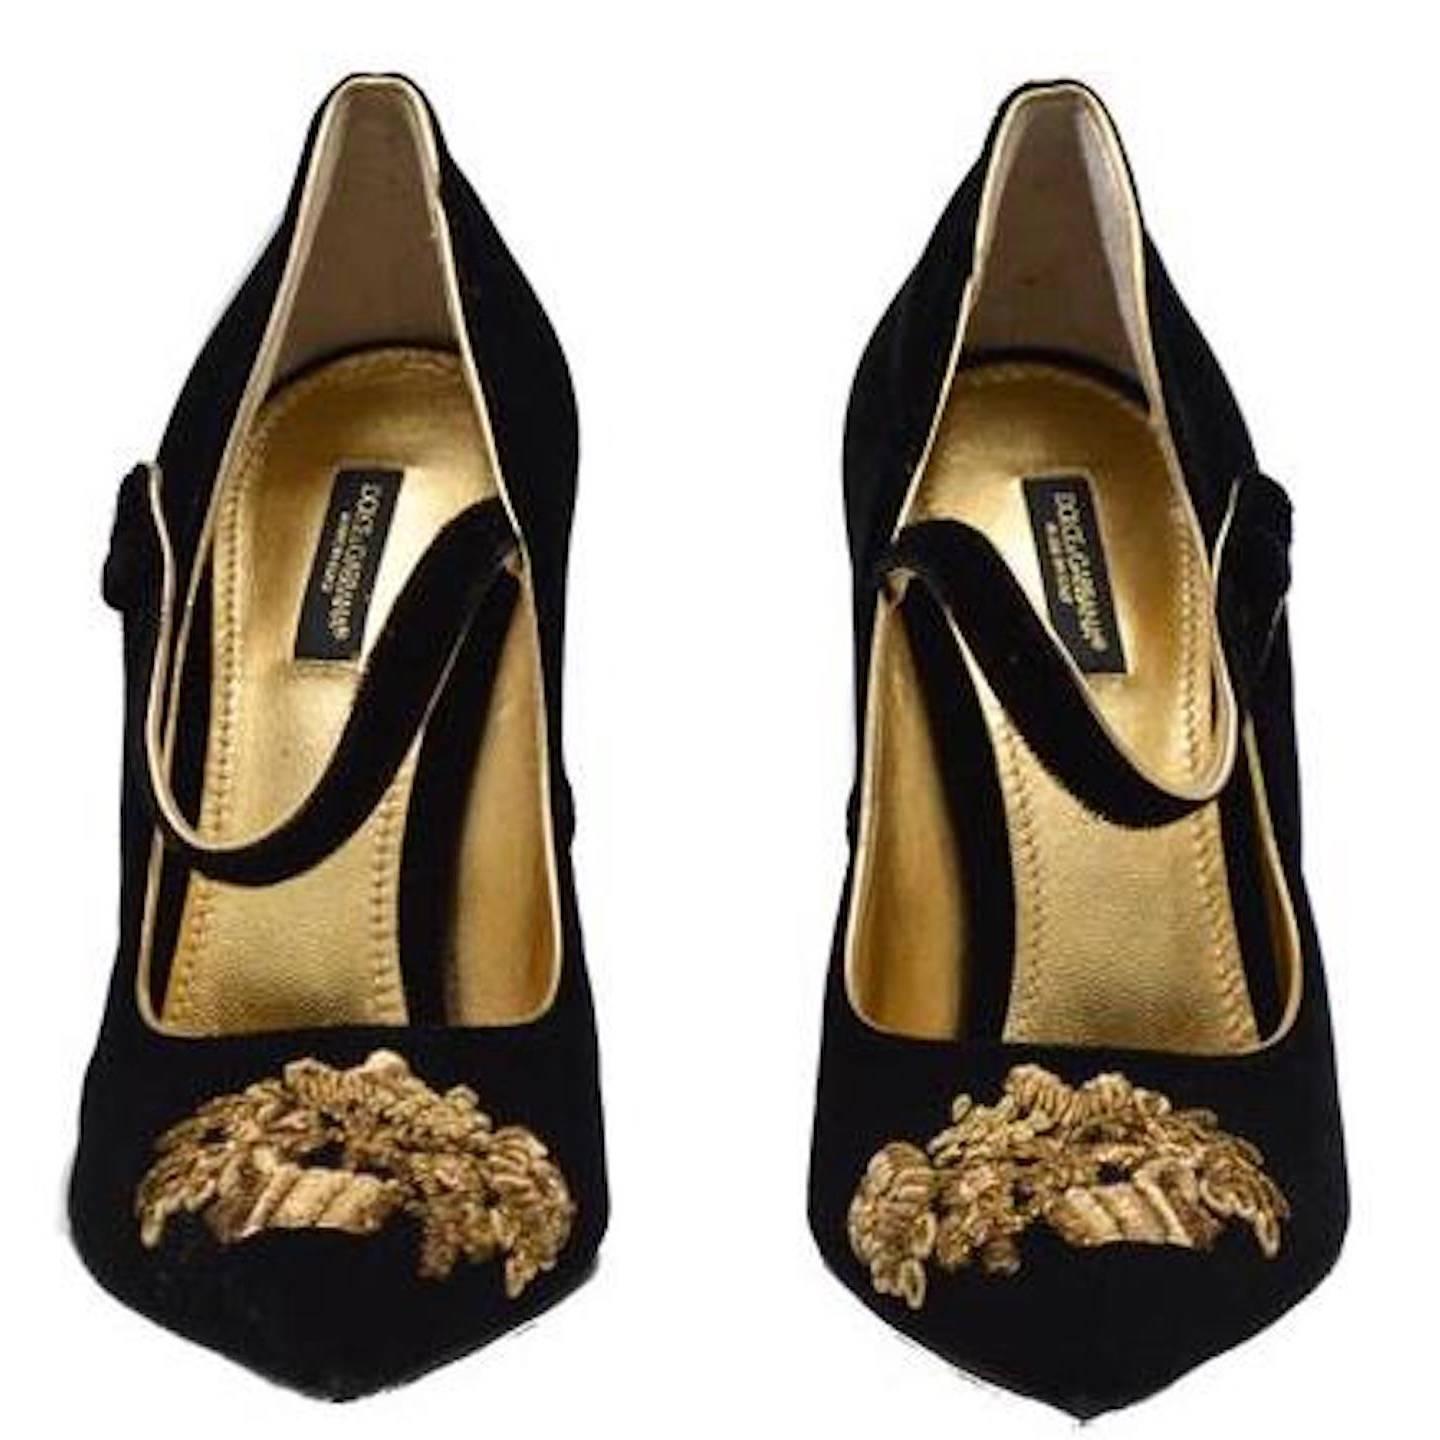 Nappa mordore sandals with baroque DG heel in Gold for | Dolce&Gabbana® US